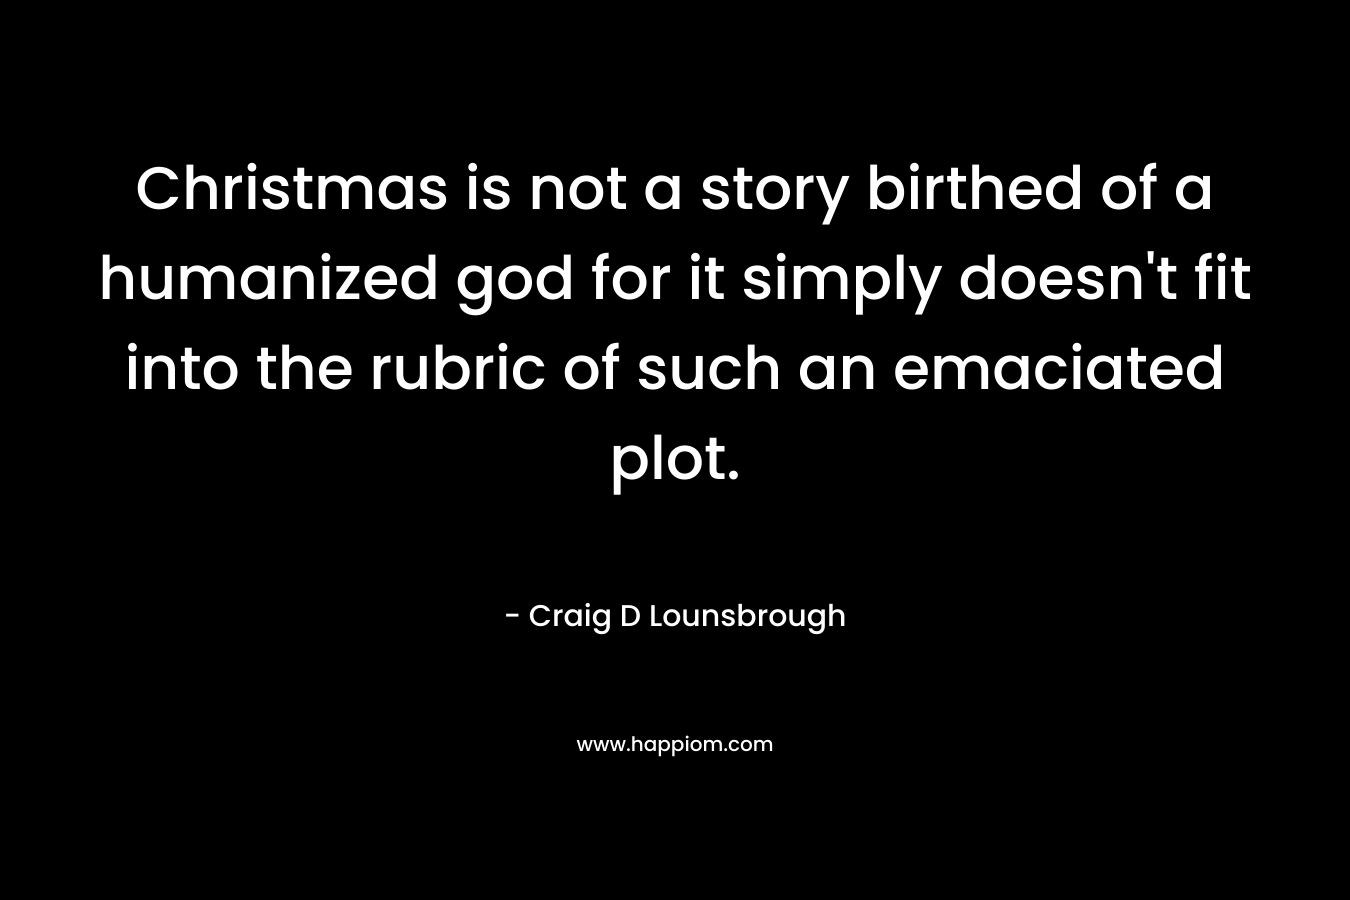 Christmas is not a story birthed of a humanized god for it simply doesn’t fit into the rubric of such an emaciated plot. – Craig D Lounsbrough